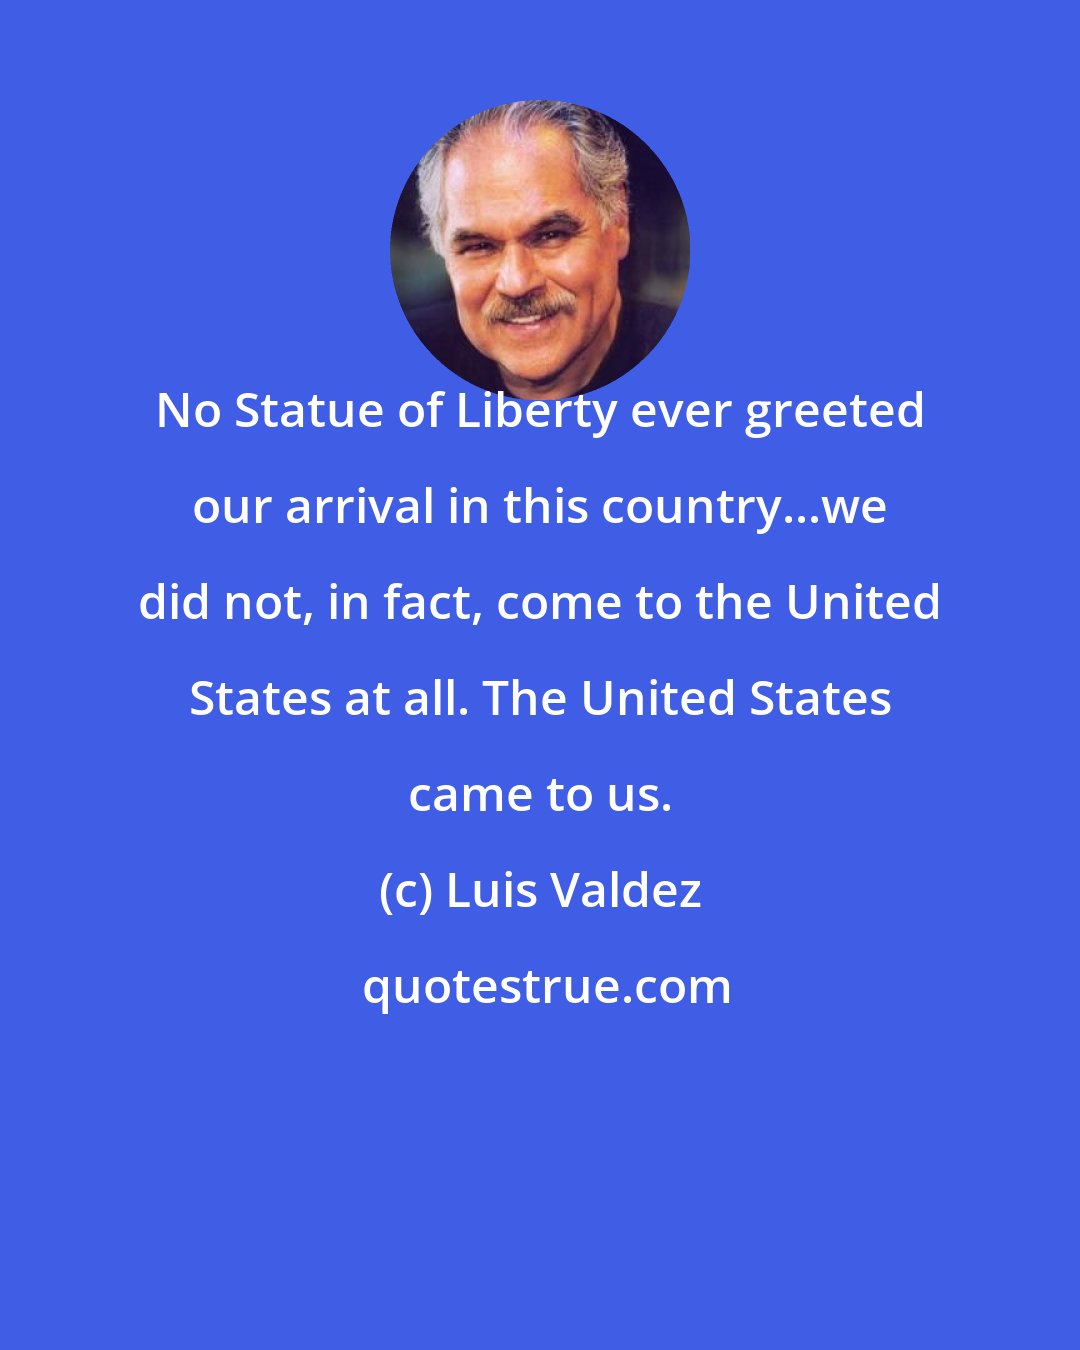 Luis Valdez: No Statue of Liberty ever greeted our arrival in this country...we did not, in fact, come to the United States at all. The United States came to us.